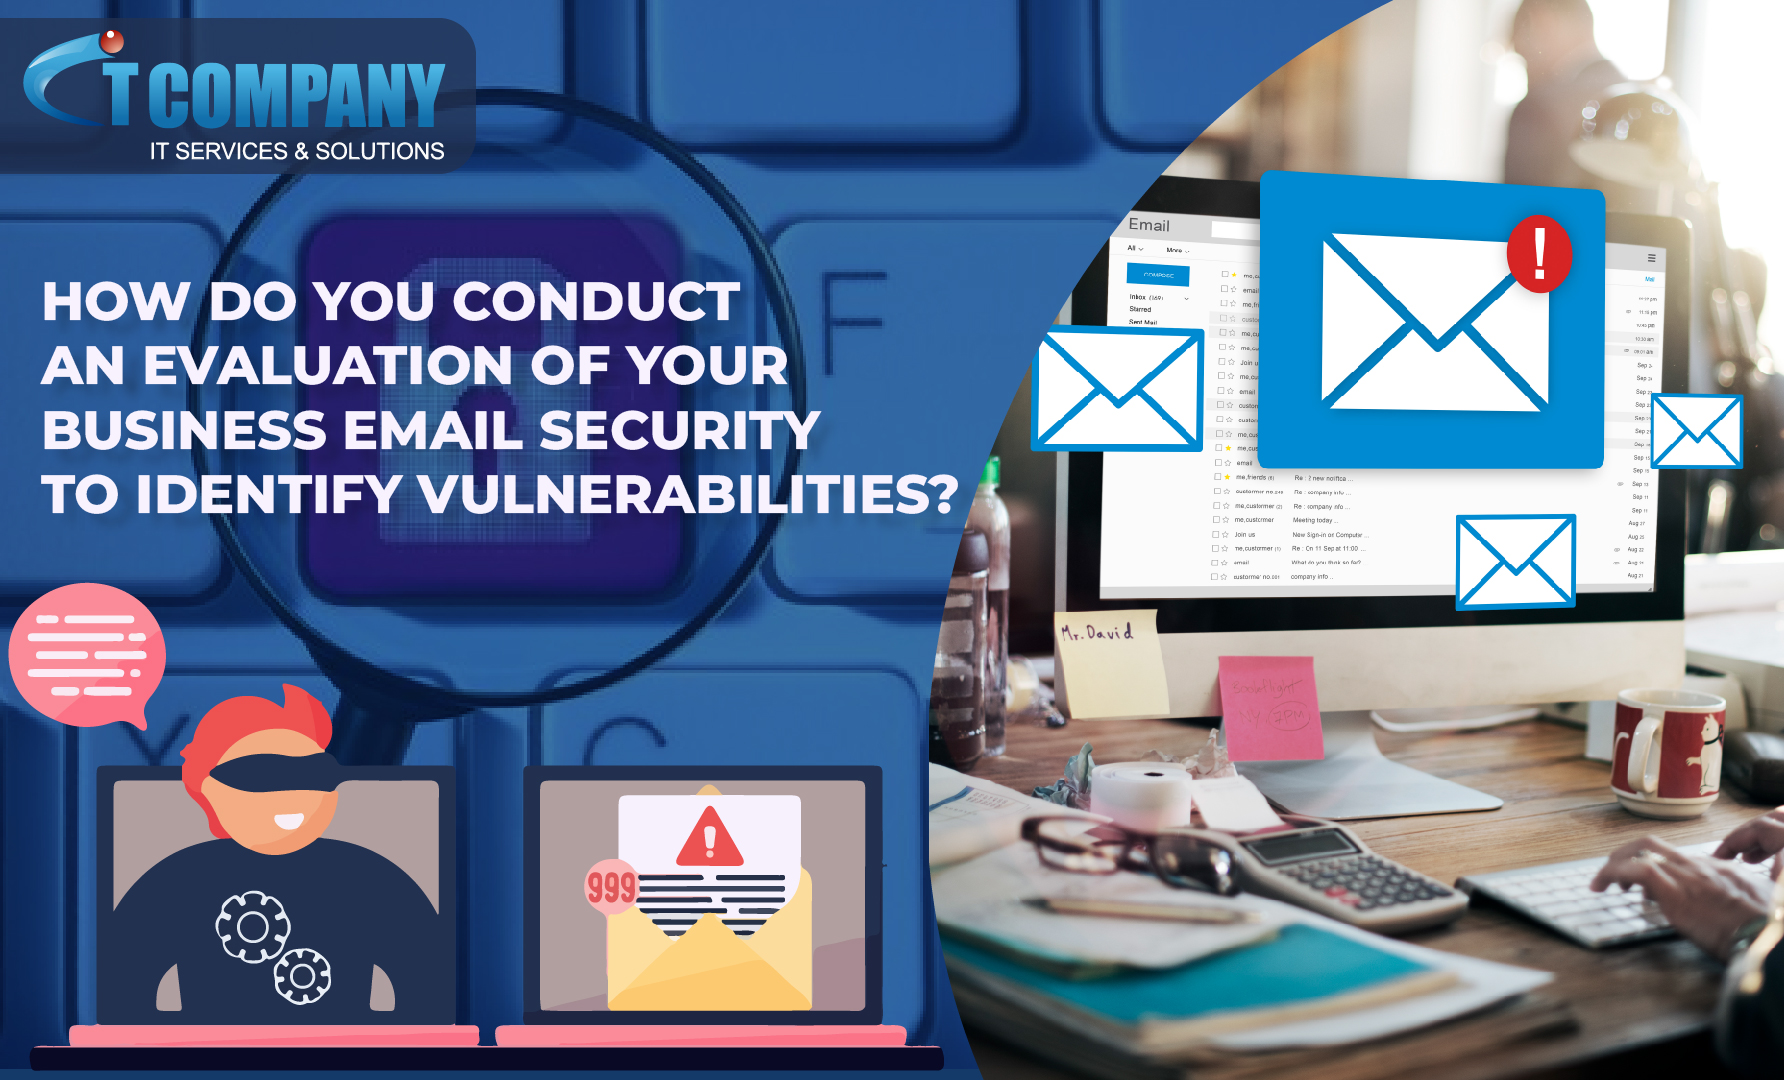 How to Conduct an Evaluation of Your Business Email Security to Identify Vulnerabilities